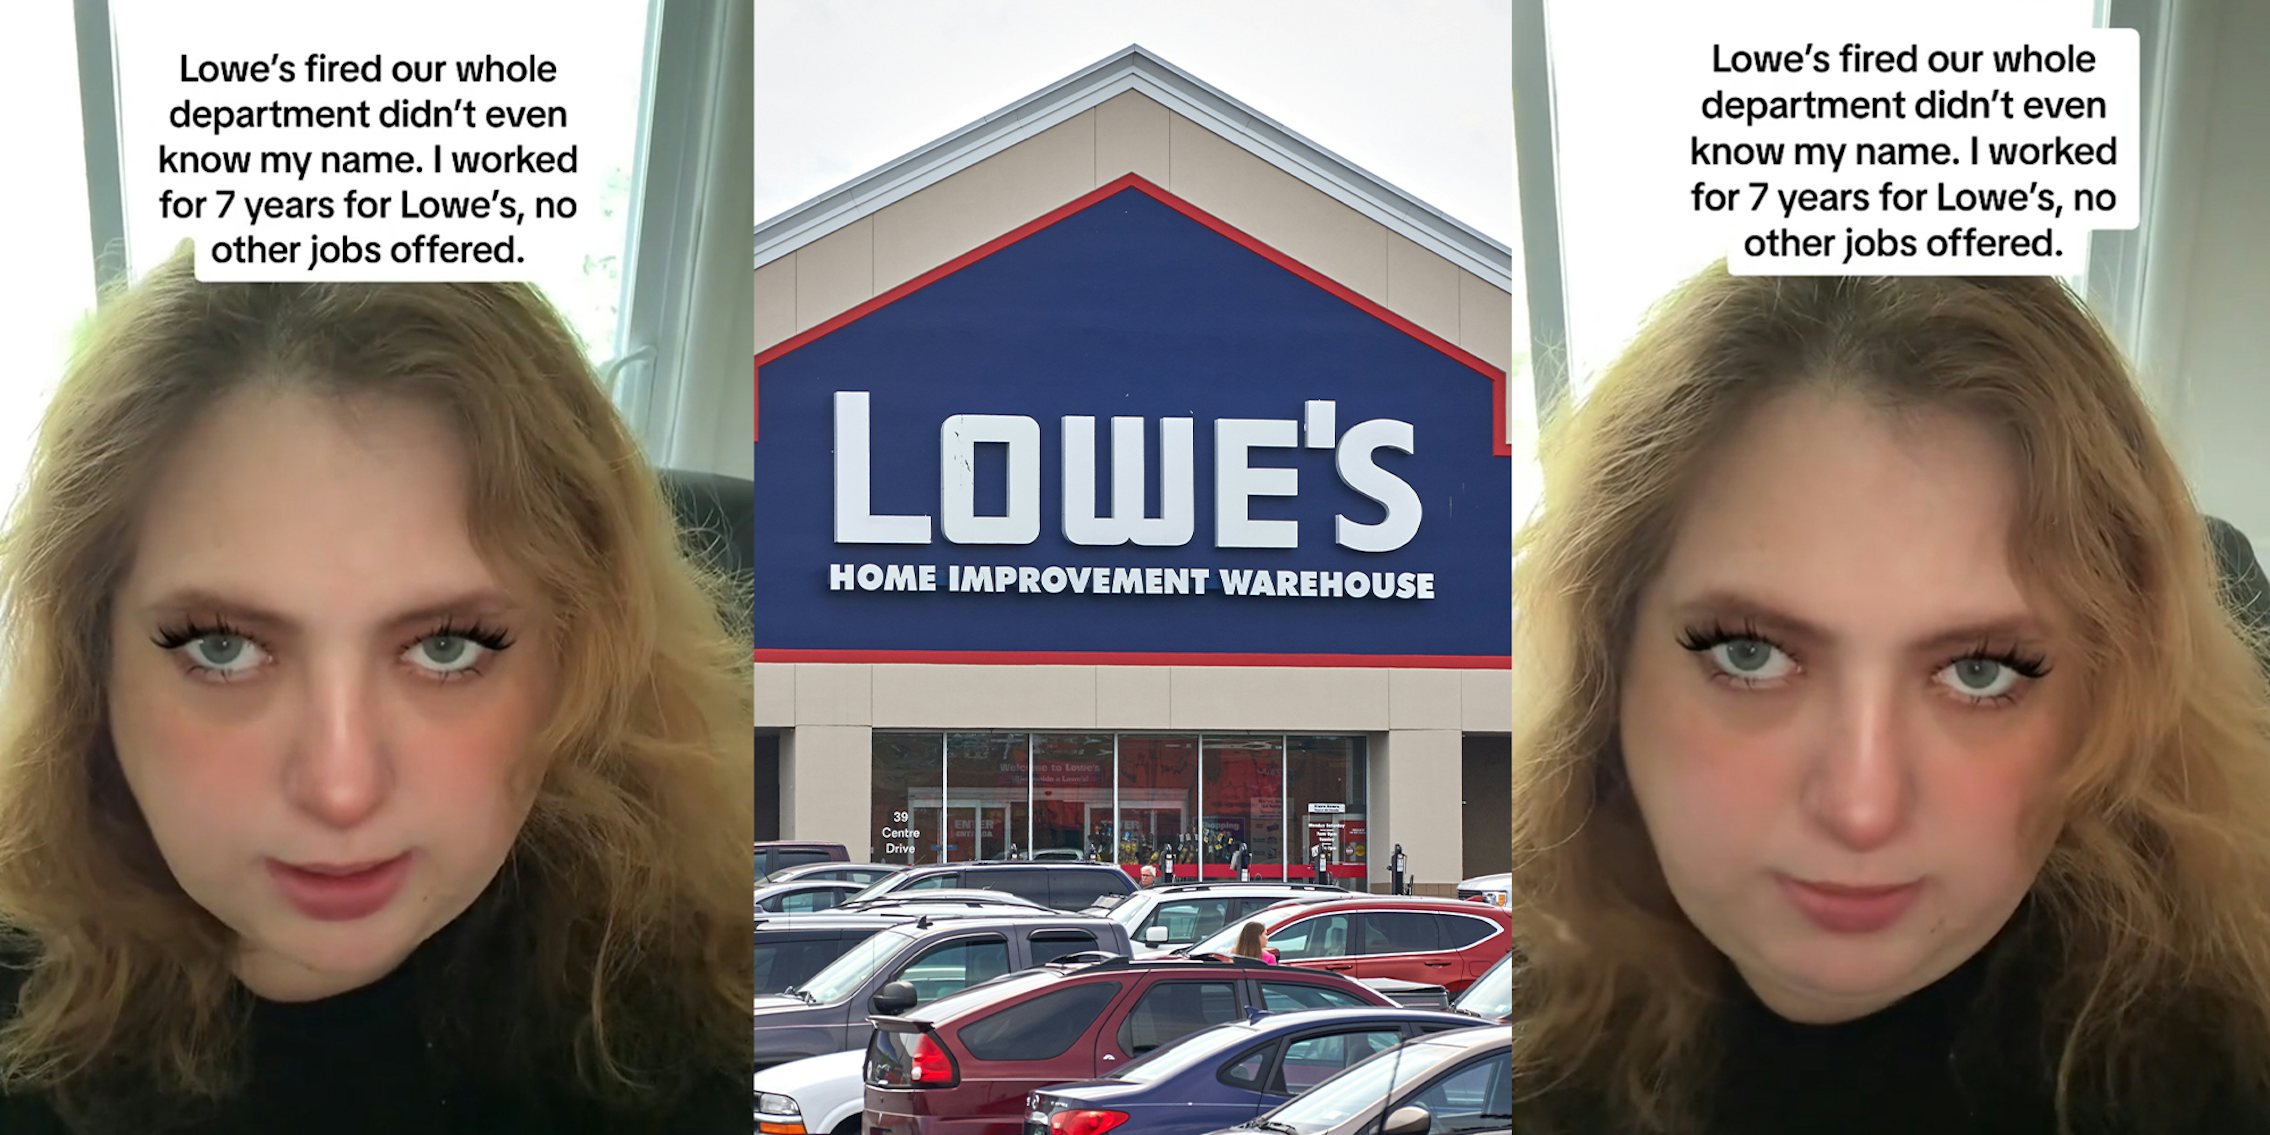 Woman who worked for Lowe's Explains how her department was fired; Lowe's Store Front